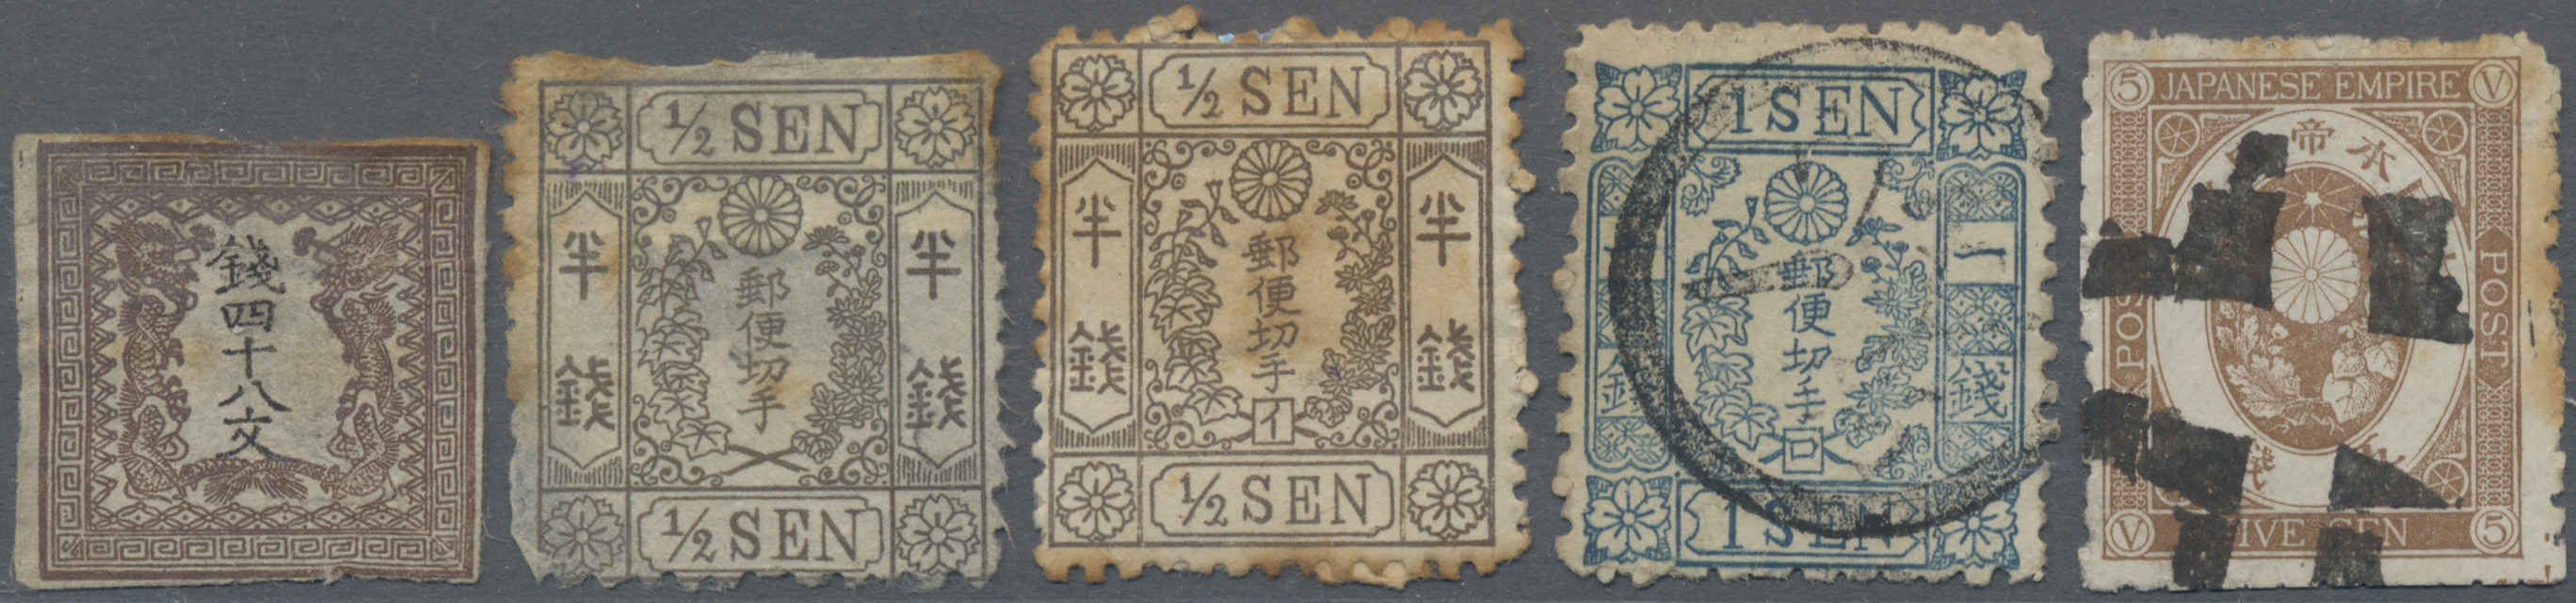 Lot 7441 - Japan  -  Auktionshaus Christoph Gärtner GmbH & Co. KG 54th AUCTION - Day 4